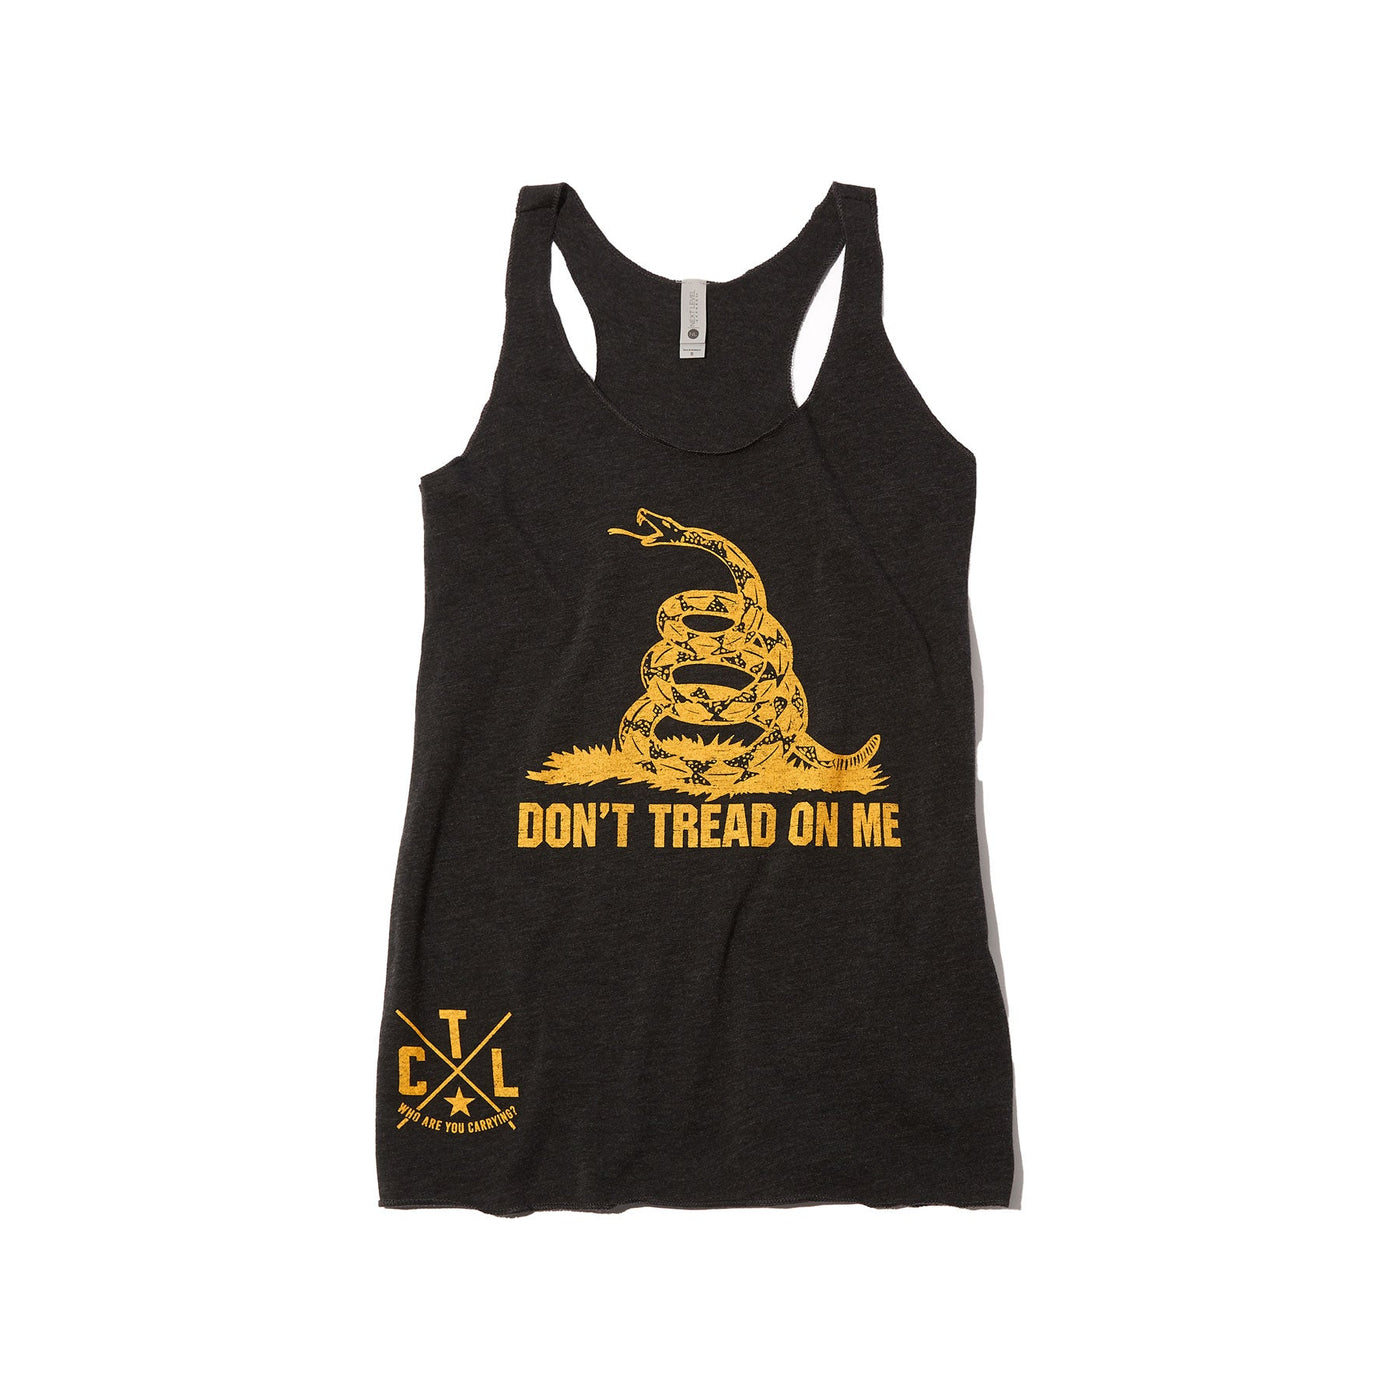 Don't Tread On Me Tank Top - Carry The Load Shop